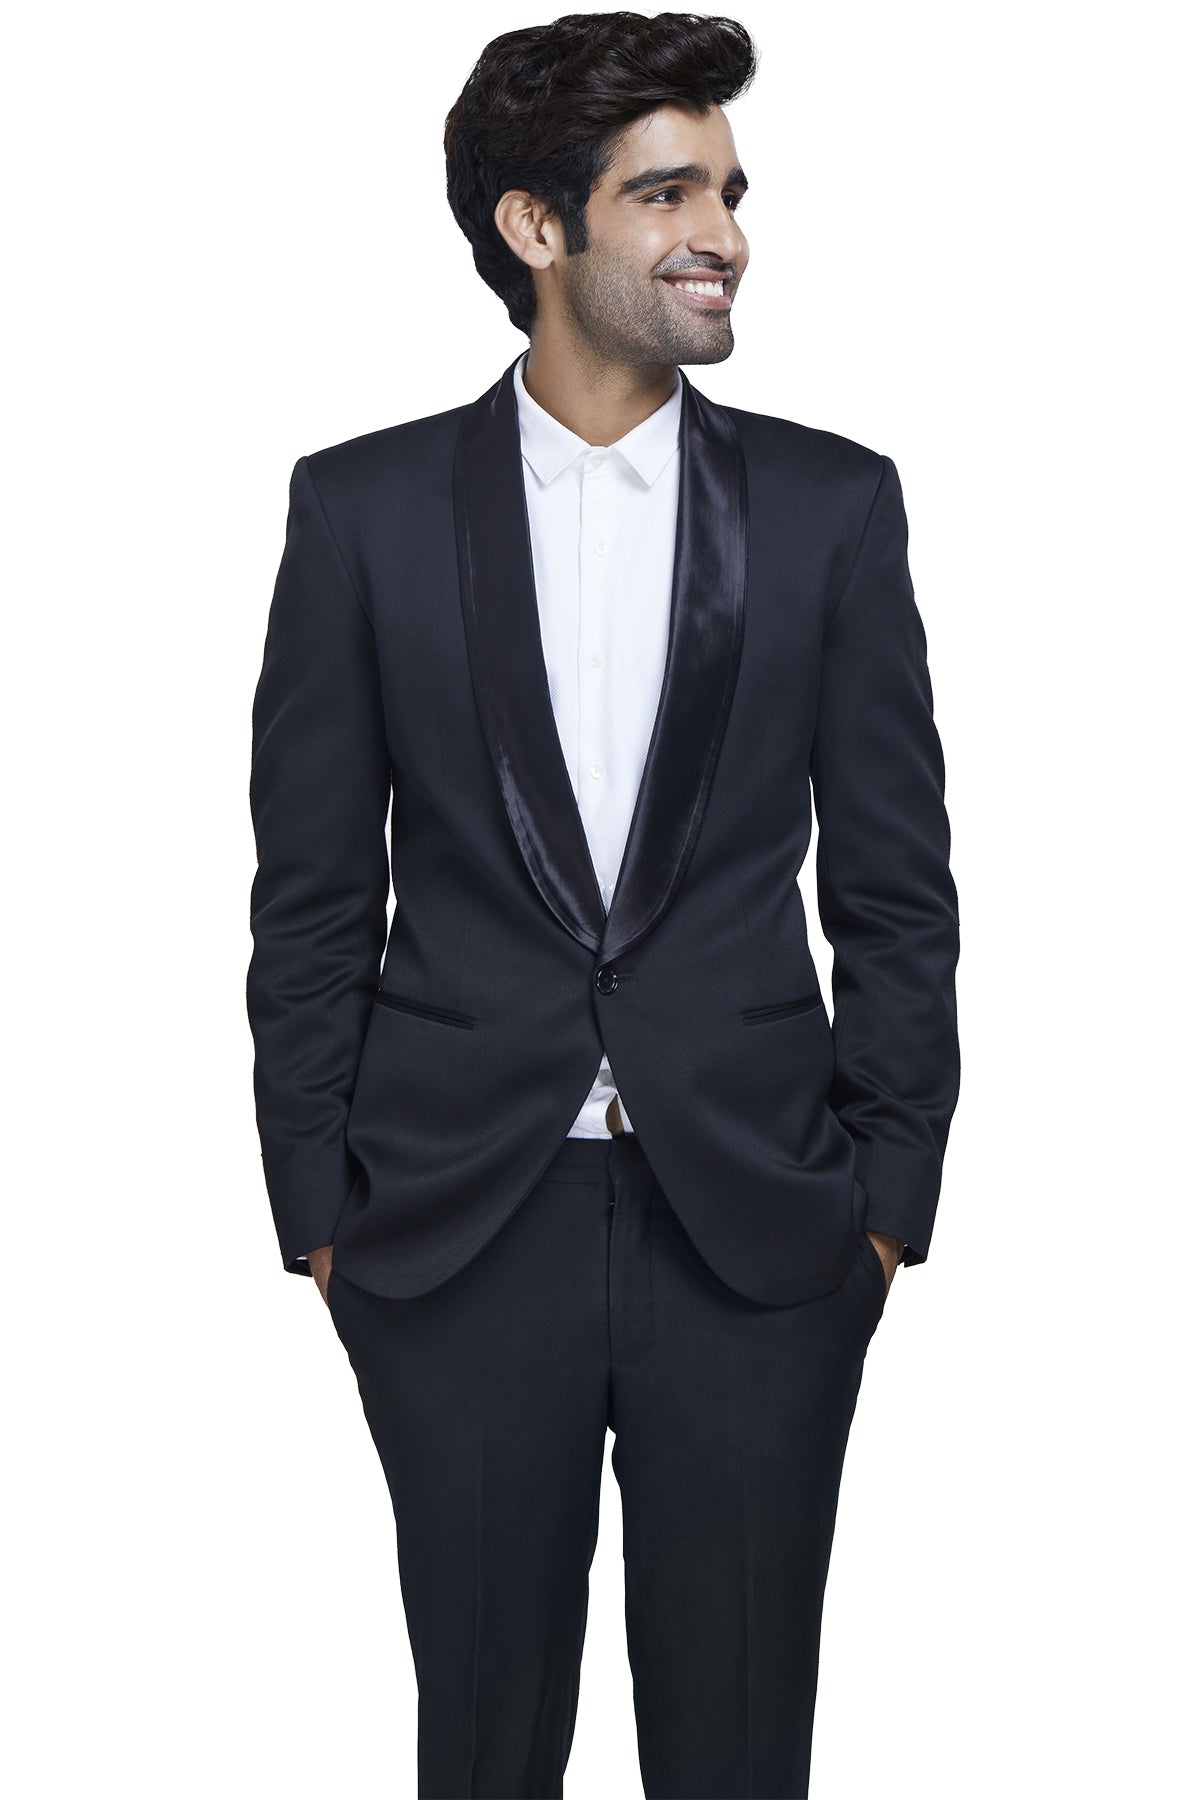 Blaze a statement trail in black! Rent out this dinner jacket with formal black trousers in a woolen polyester blend with satin round lapels for an added finesse.
